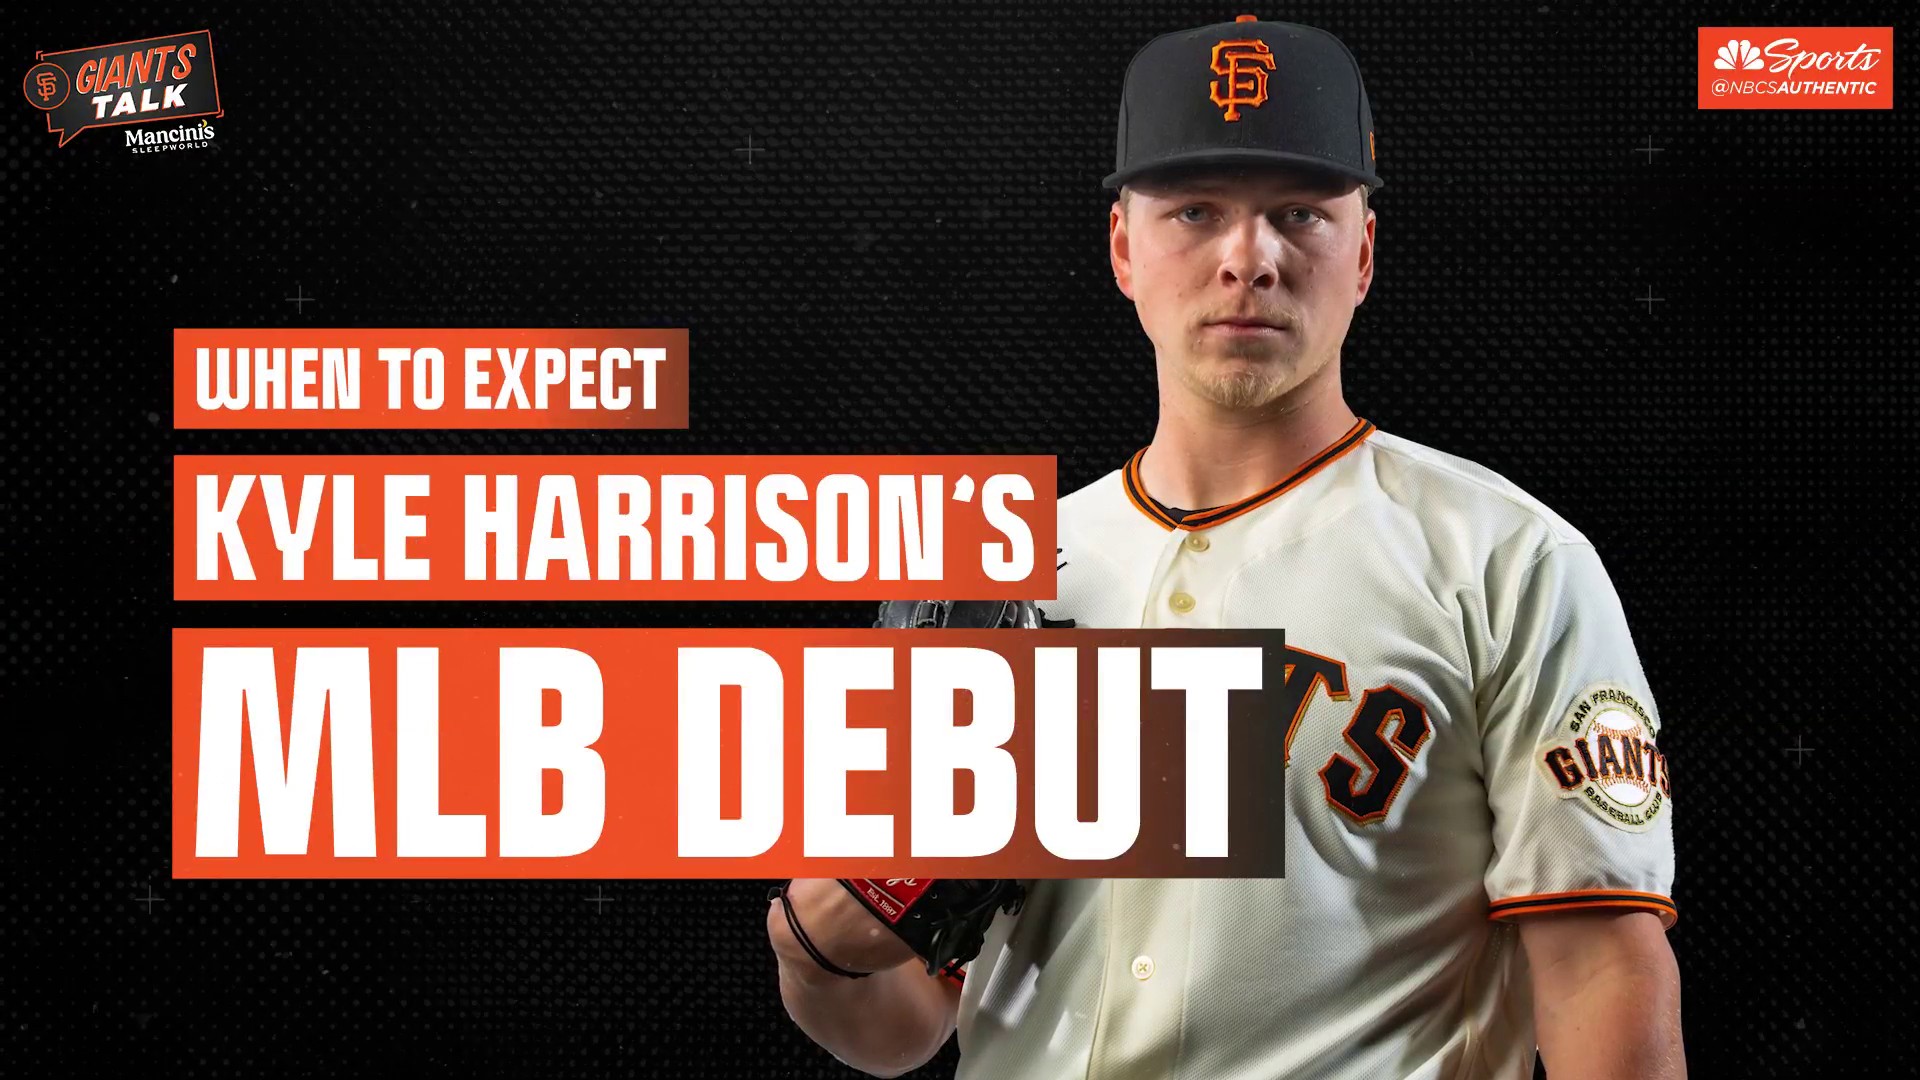 Giants top prospect Kyle Harrison could be called up to MLB soon